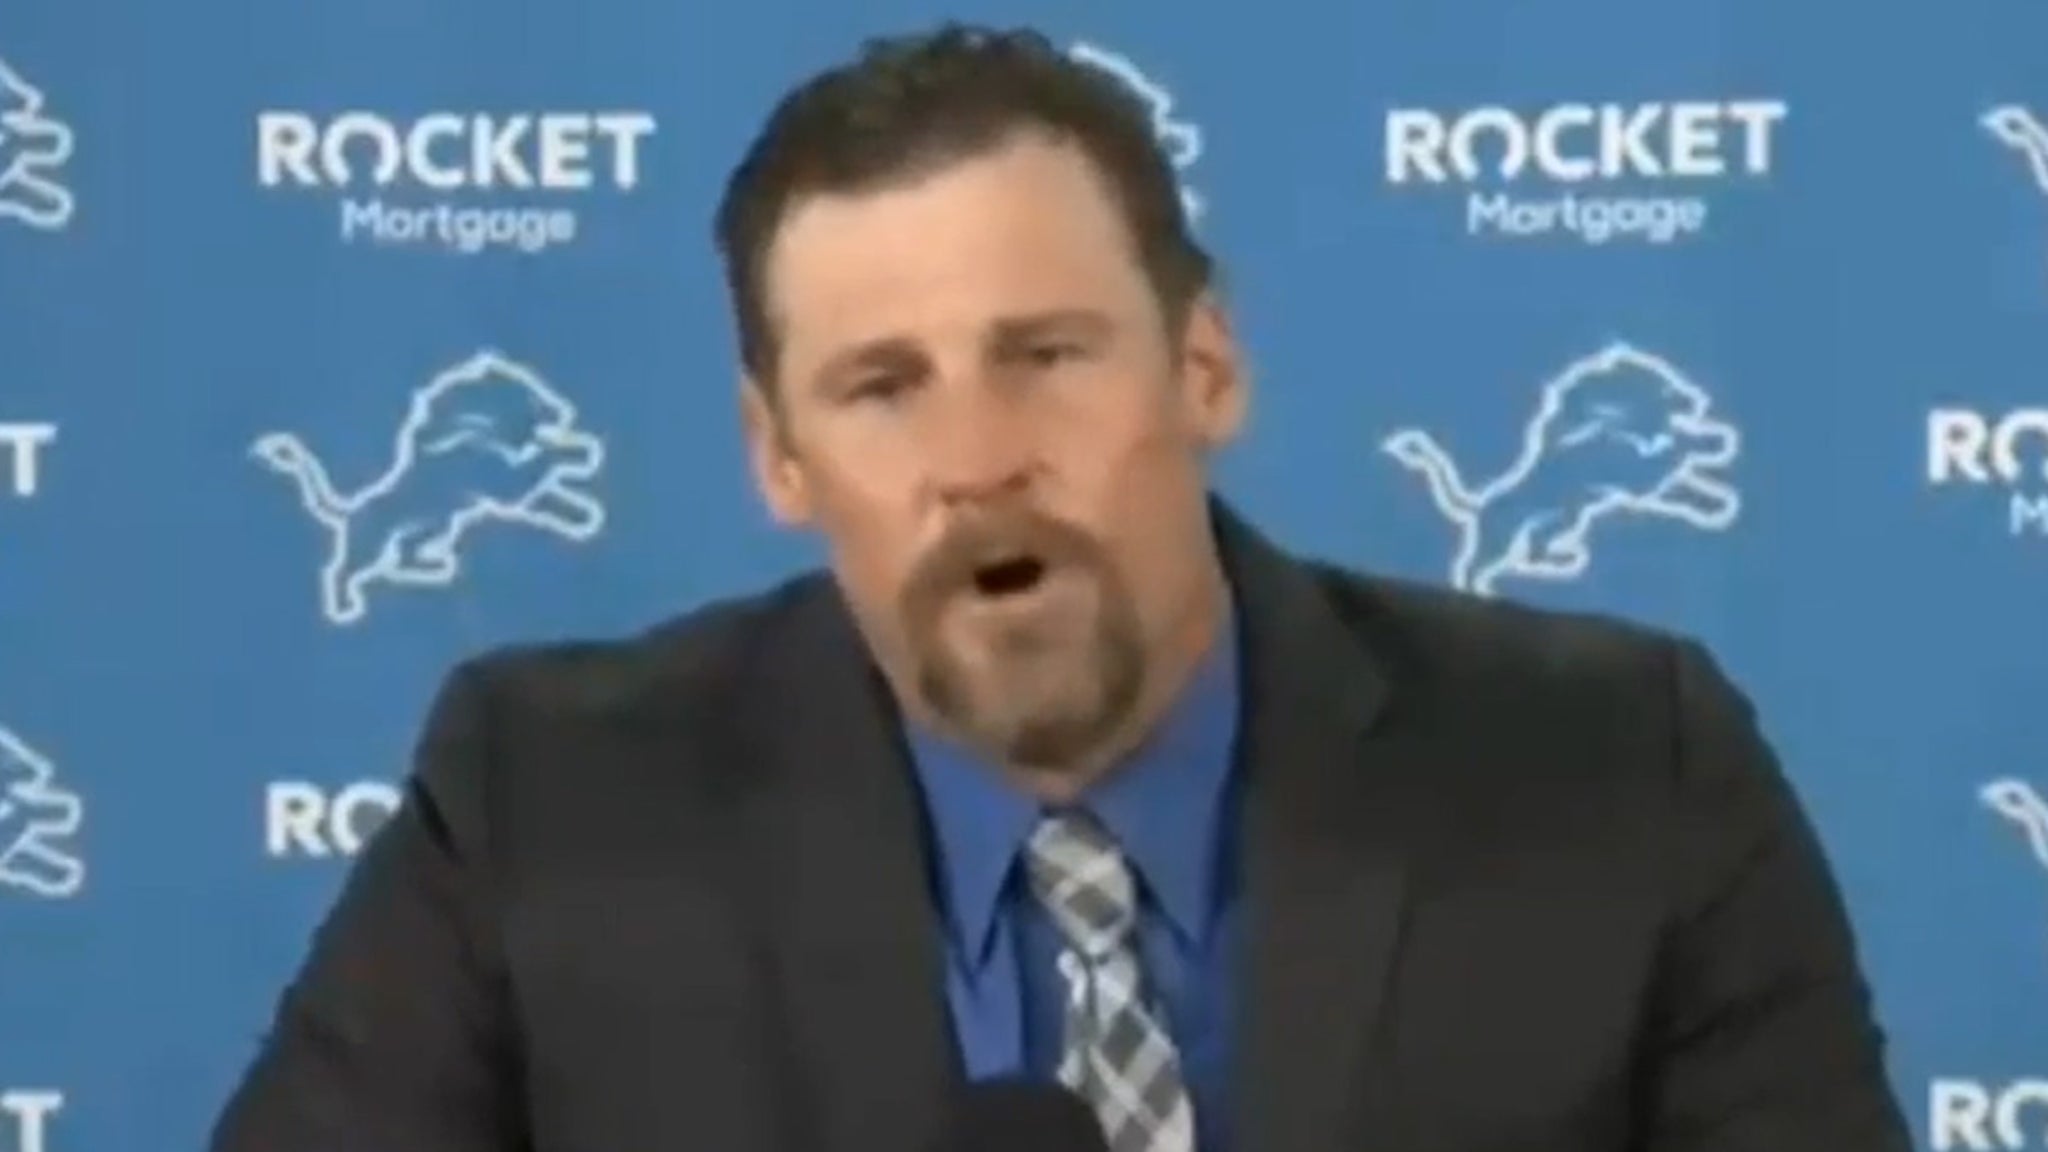 New Lions Coach Dan Campbell Gives Fiery Intro Speech, We'll Bite Off